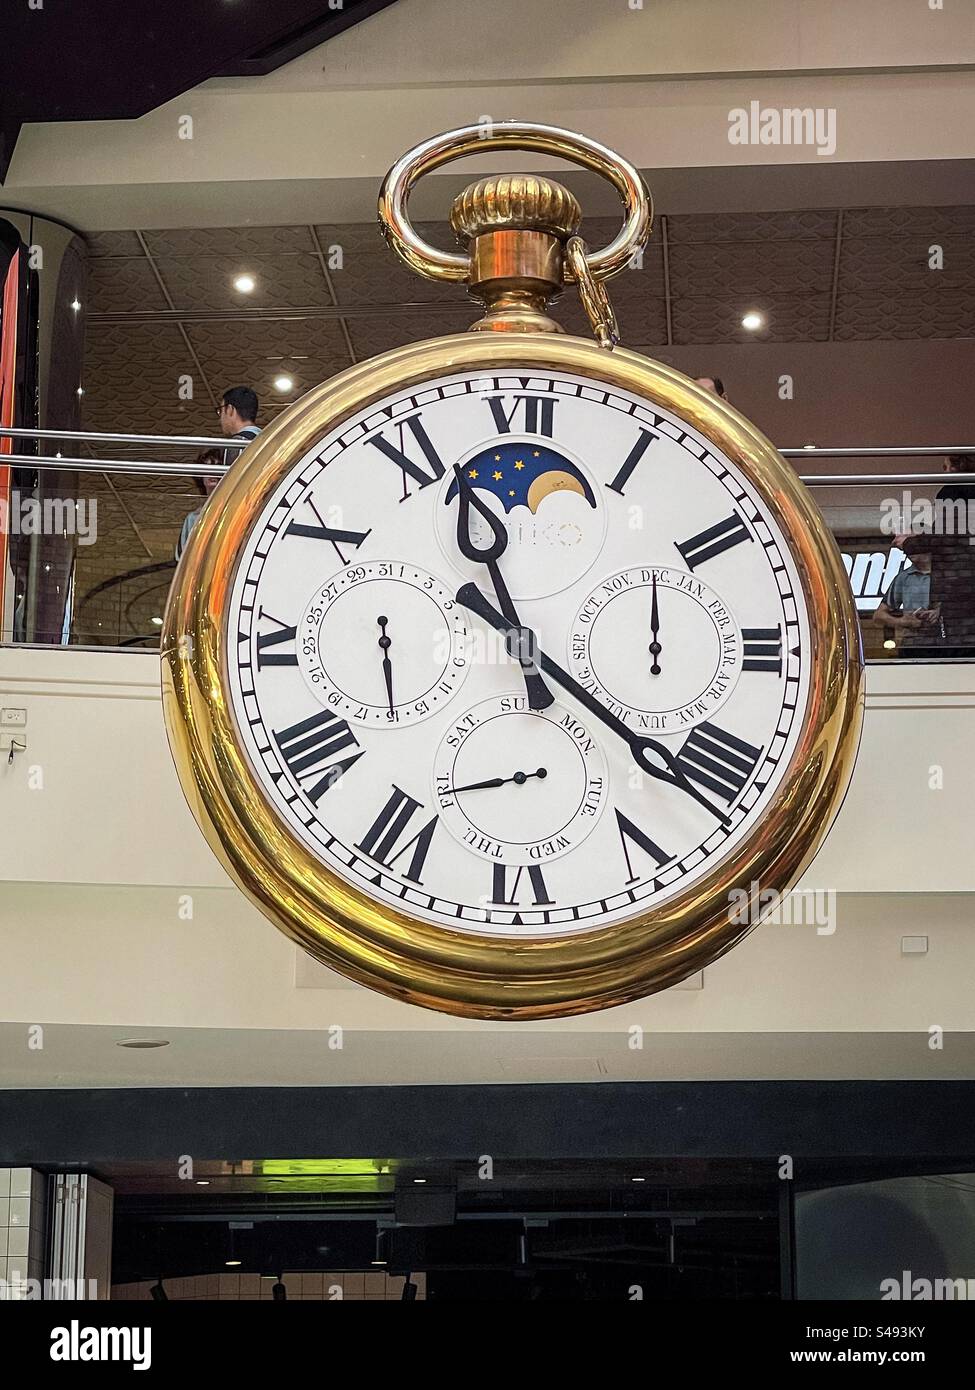 Giant clock showing time, date and day of the week at Melbourne Central mall in Melbourne, Victoria, Australia. Stock Photo